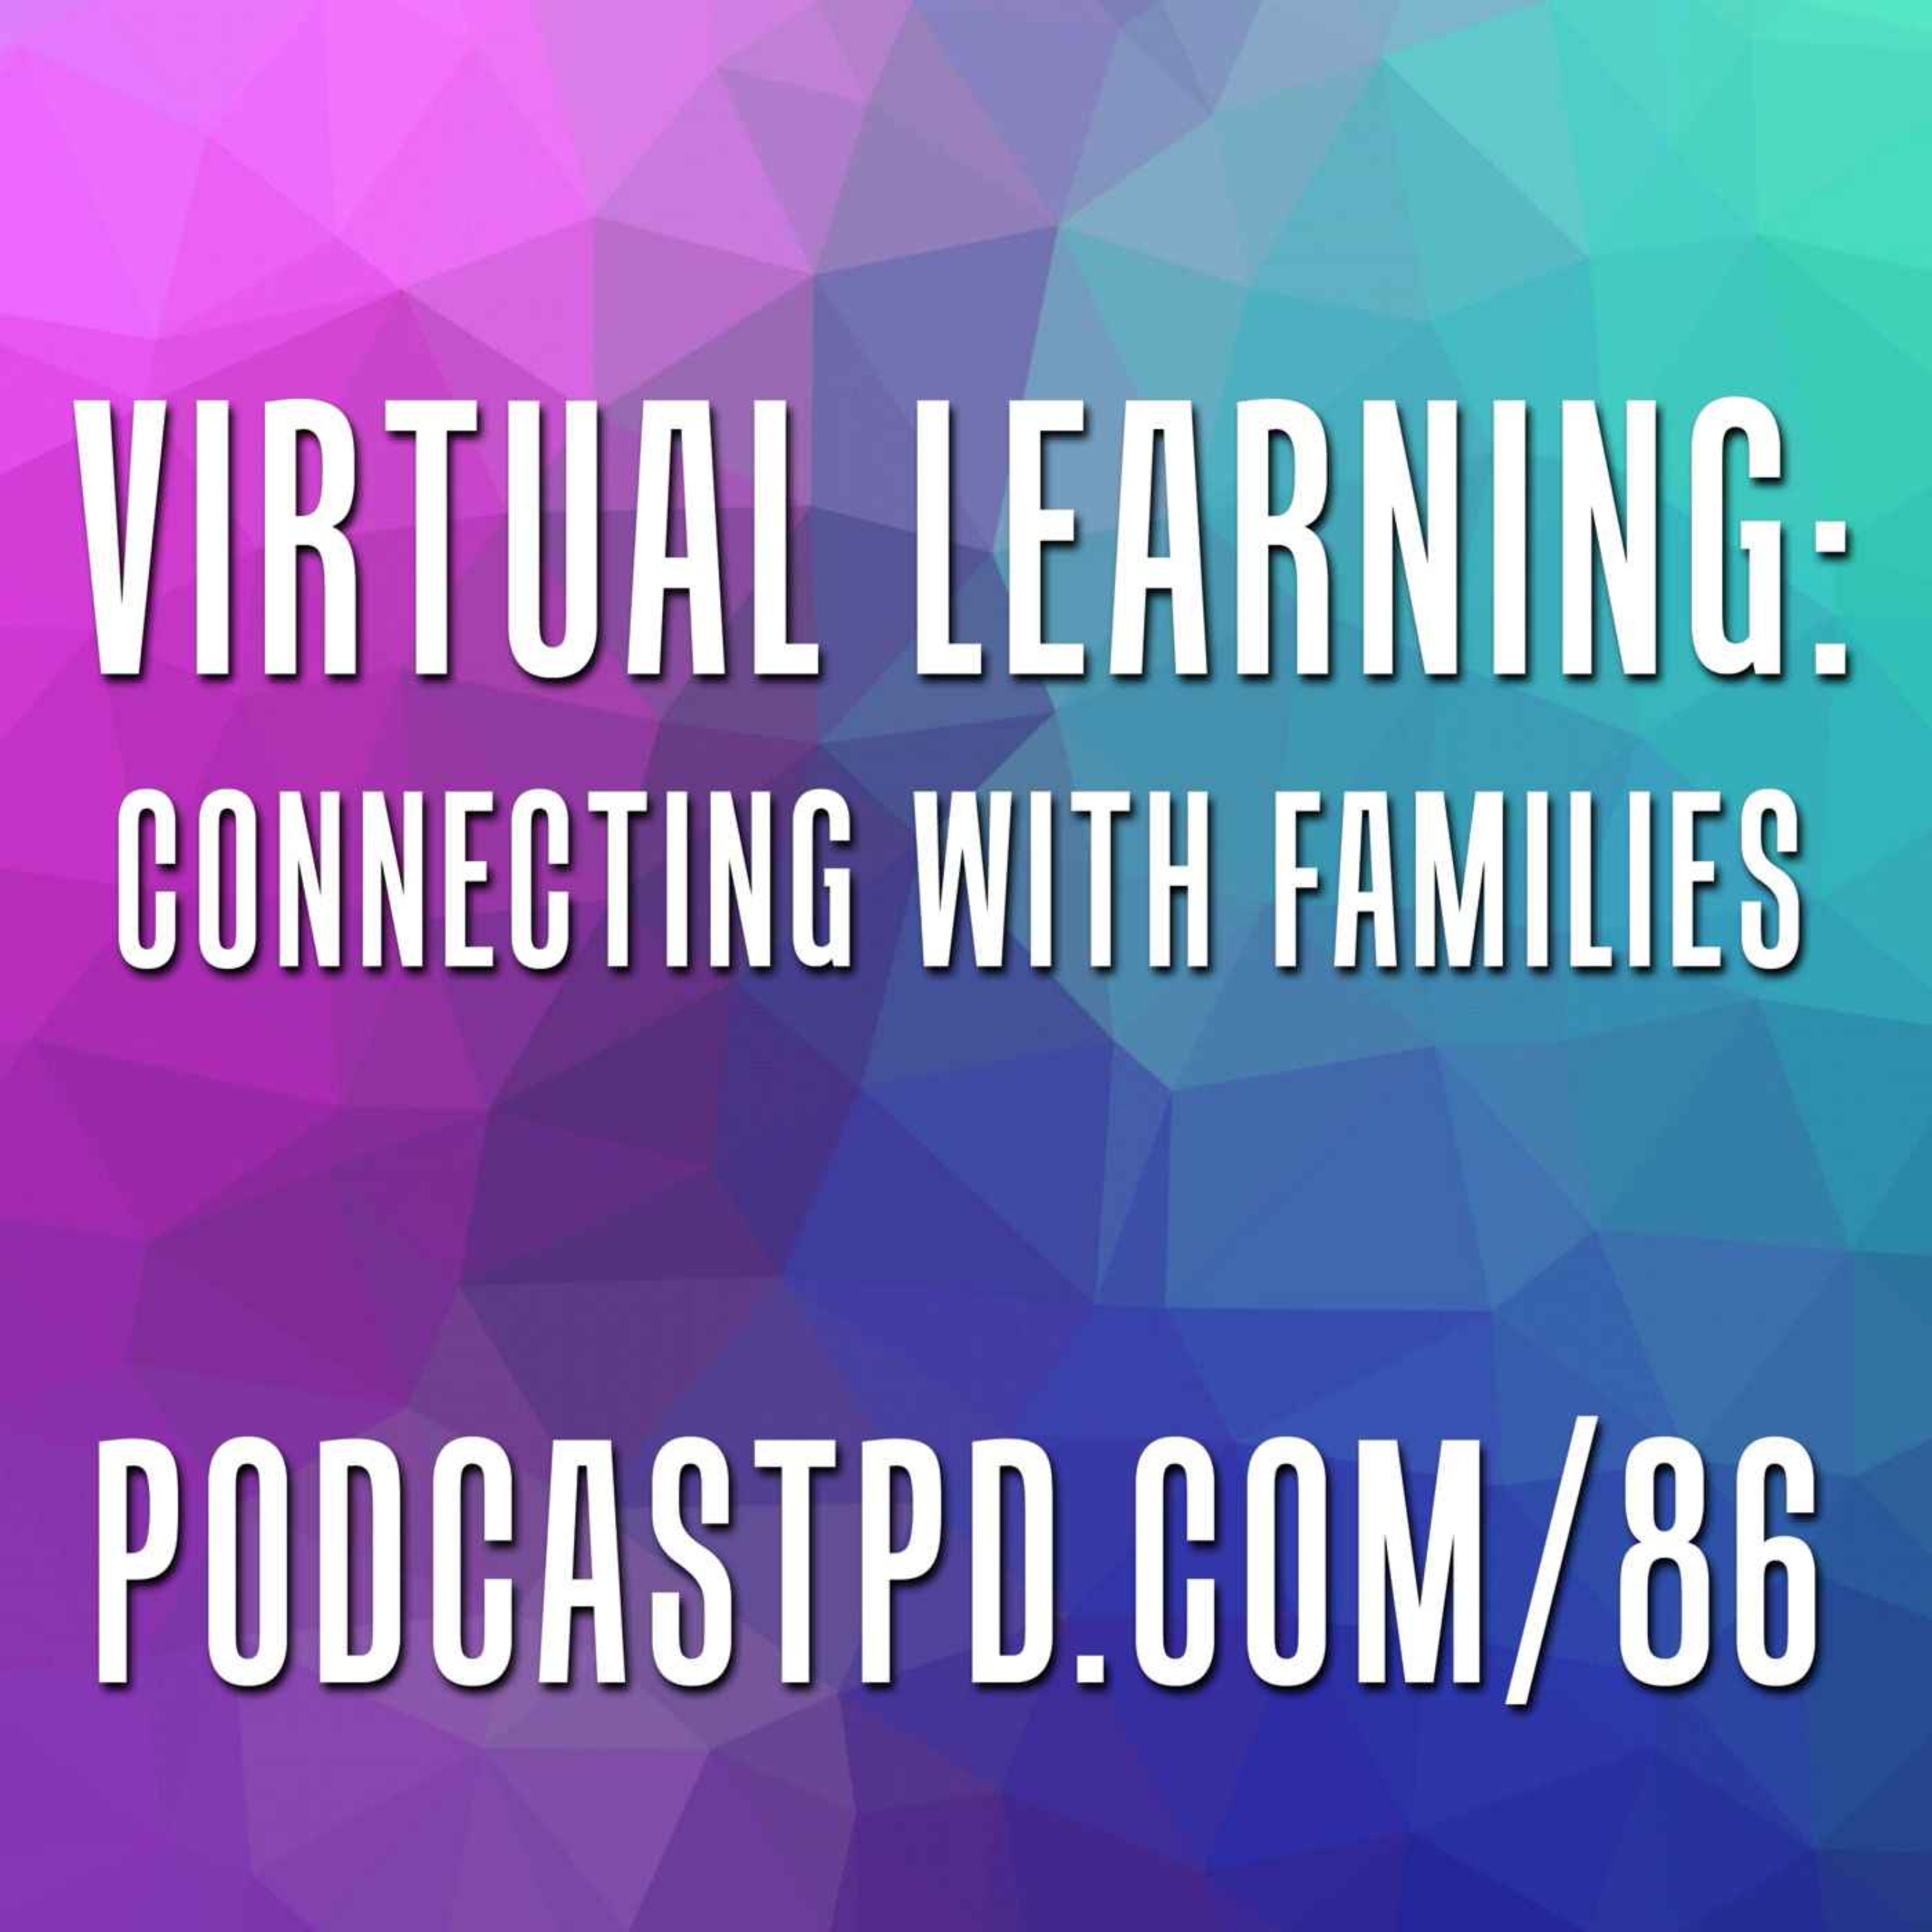 Virtual Learning: Connecting with Families - PPD086 Image